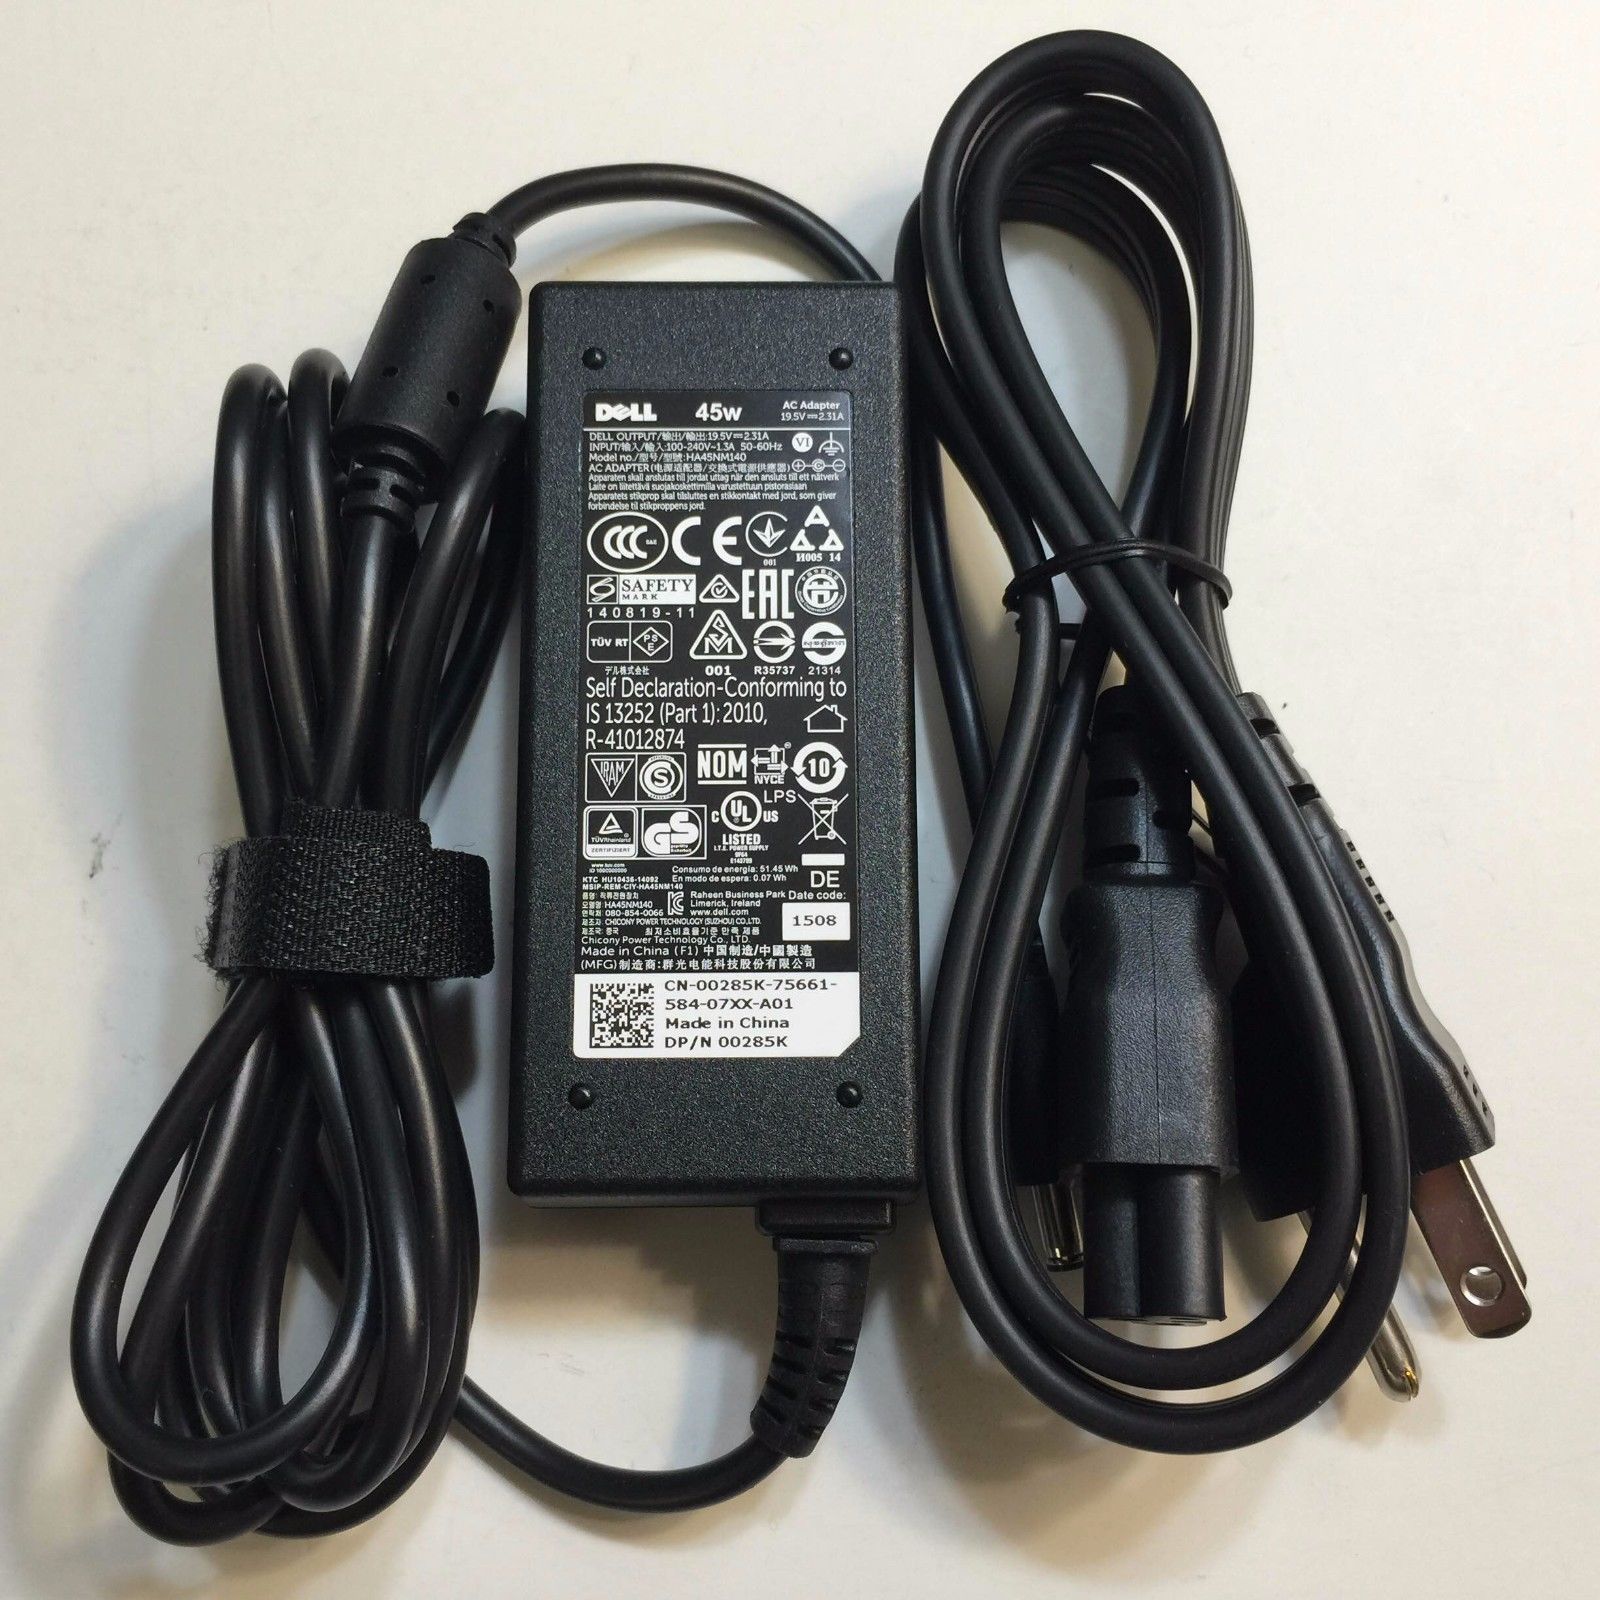 Dell HA45NM140 0285K Laptop Ac Adapter Charger & Power Cord 45W. OEM (Sin empaque de retail)